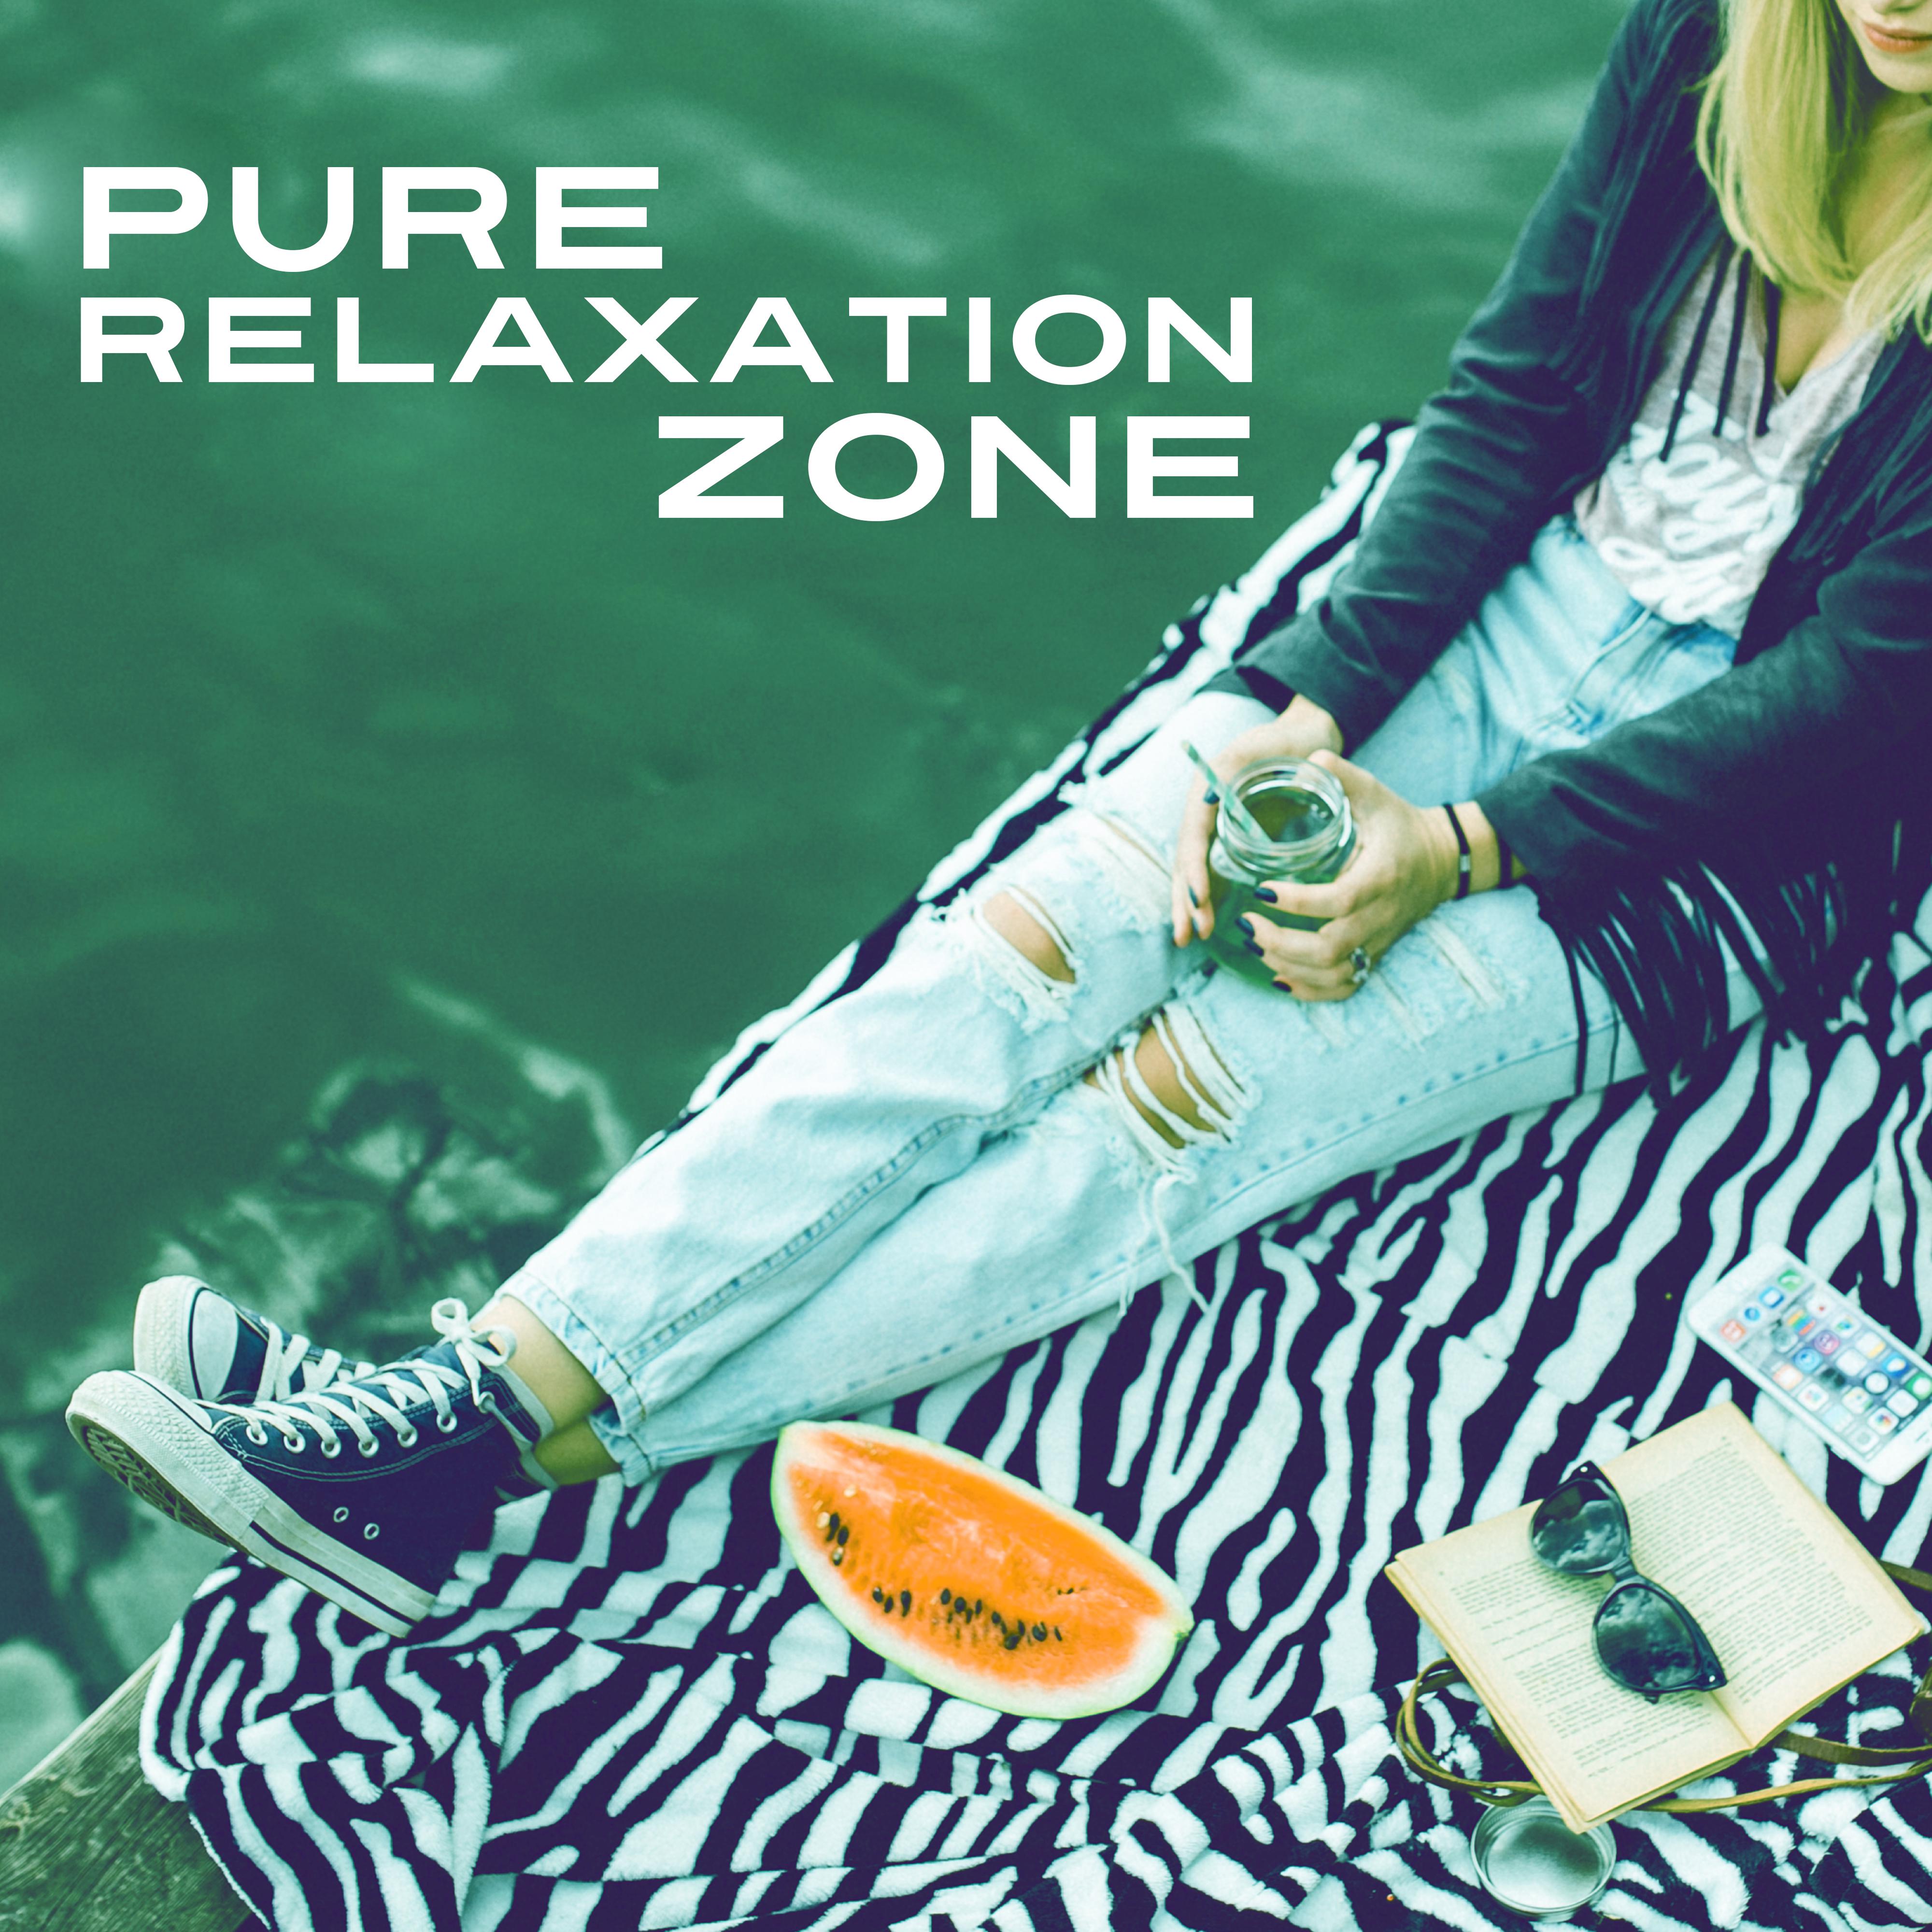 Pure Relaxation Zone – New Age Music, Relaxation Music for Hotel Spa, Healing Sounds of Nature, Massage Music, Reduce Stress